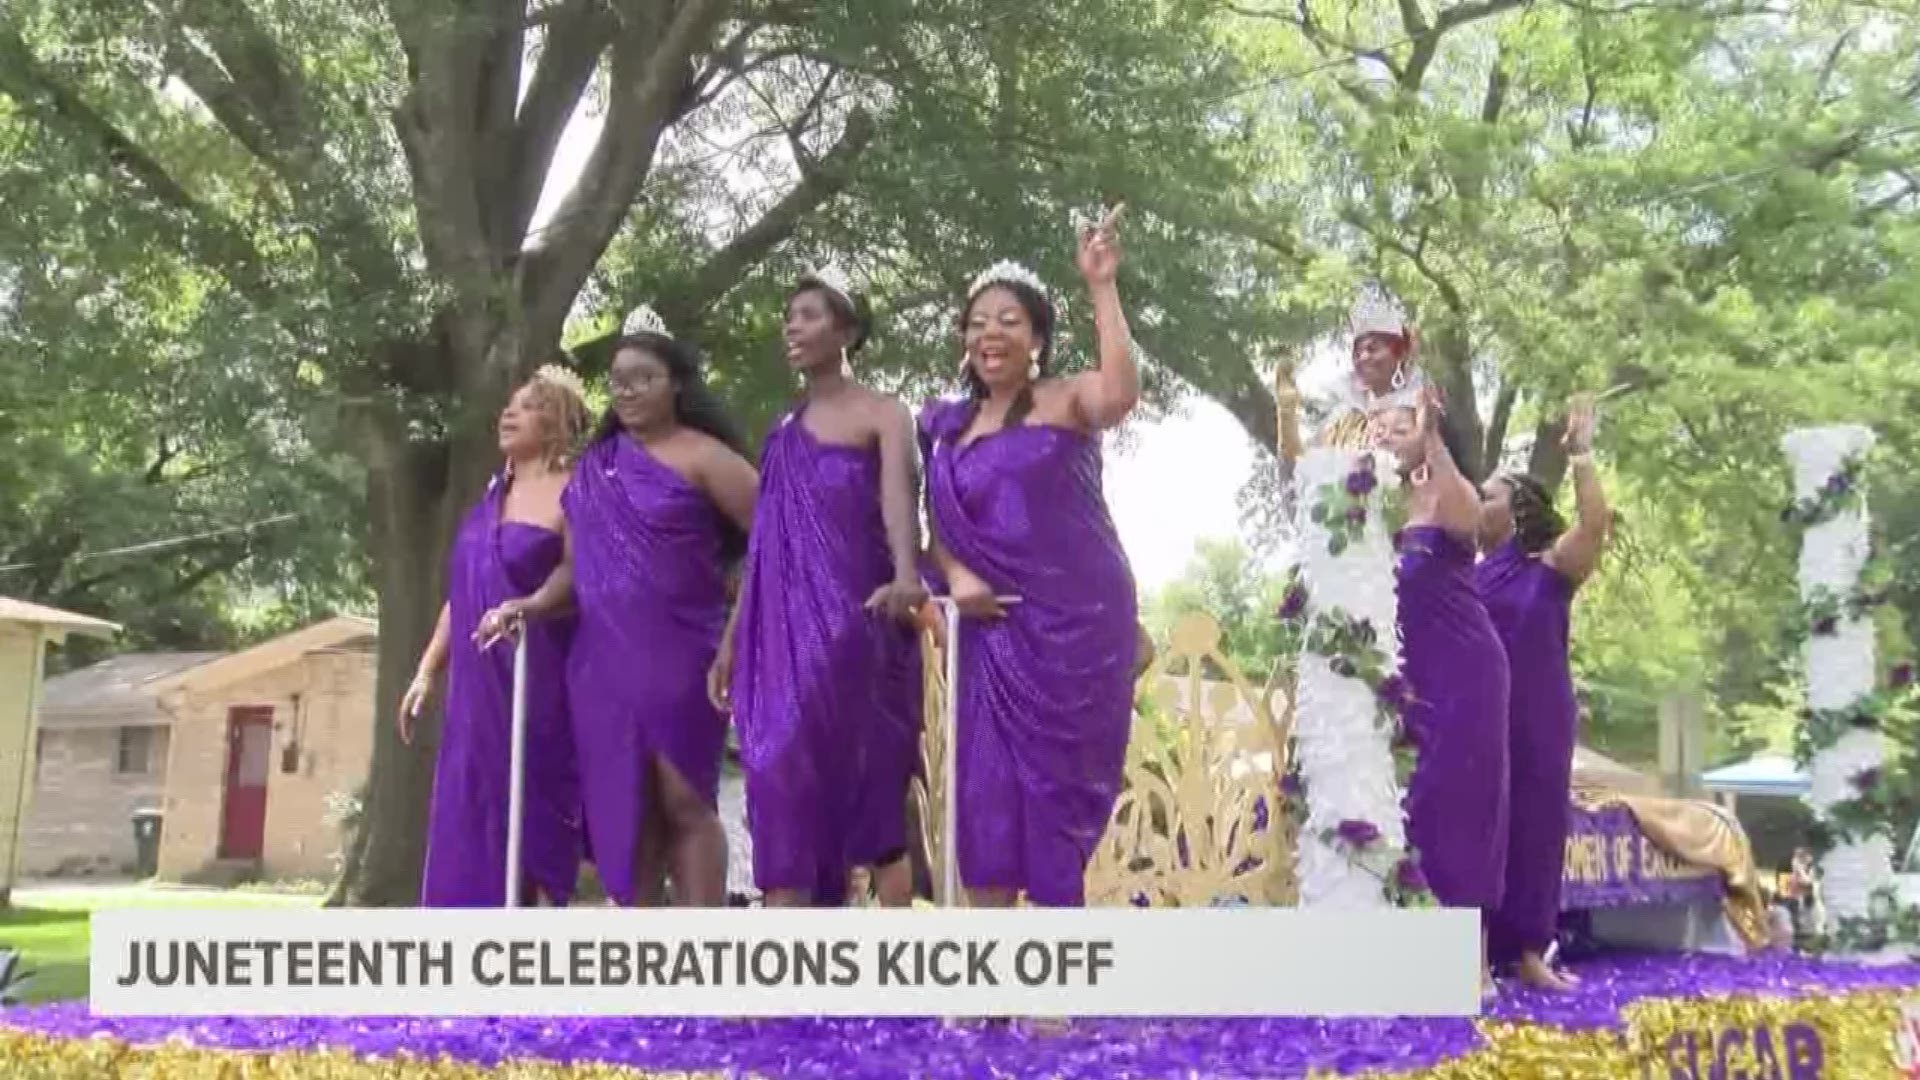 celebrations kick off in Tyler with annual parade cbs19.tv